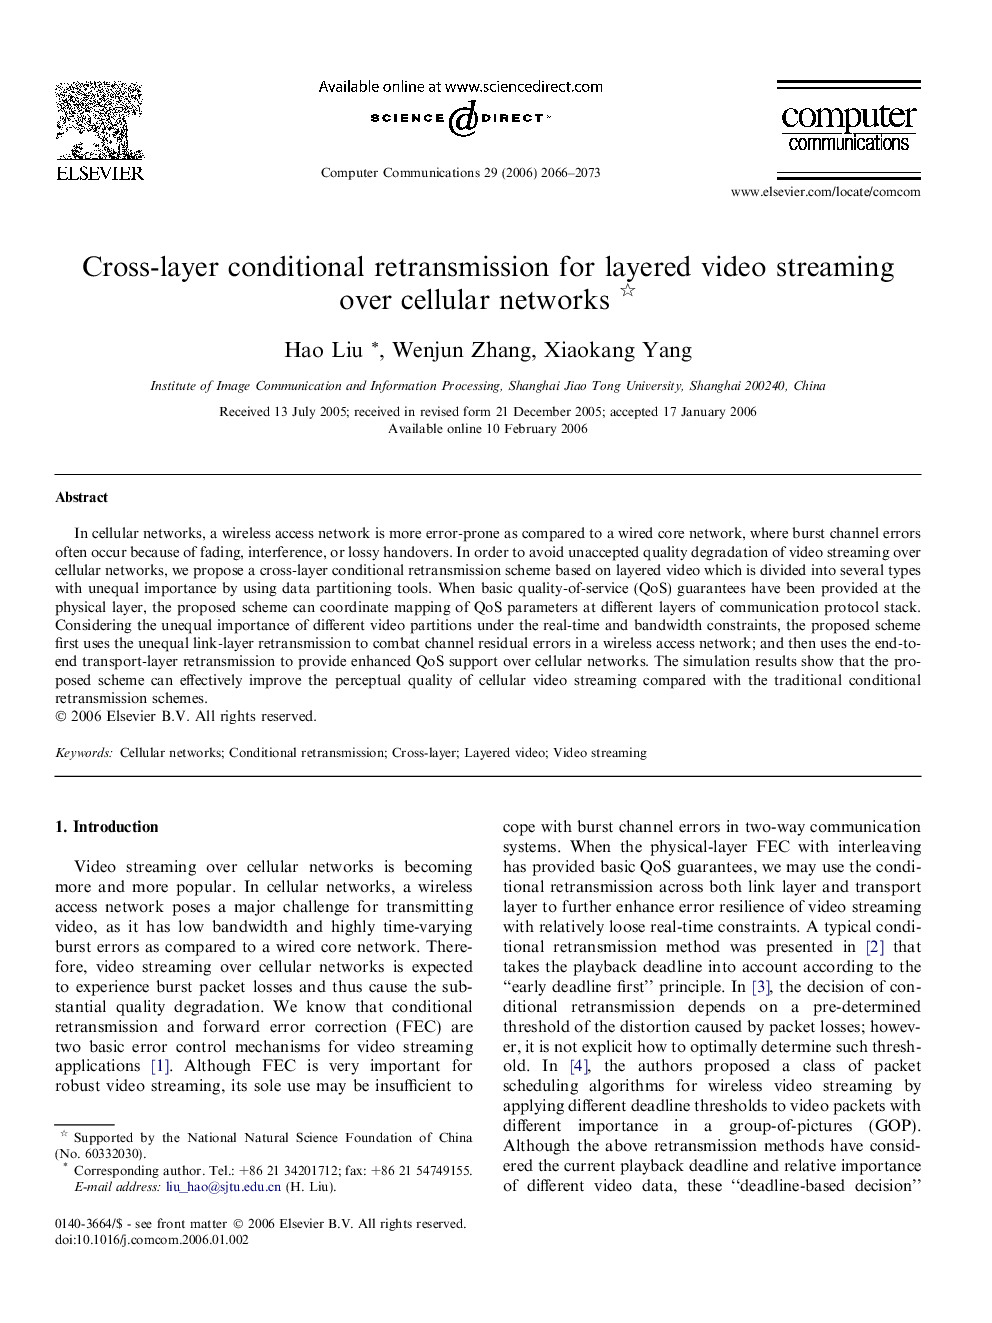 Cross-layer conditional retransmission for layered video streaming over cellular networks 